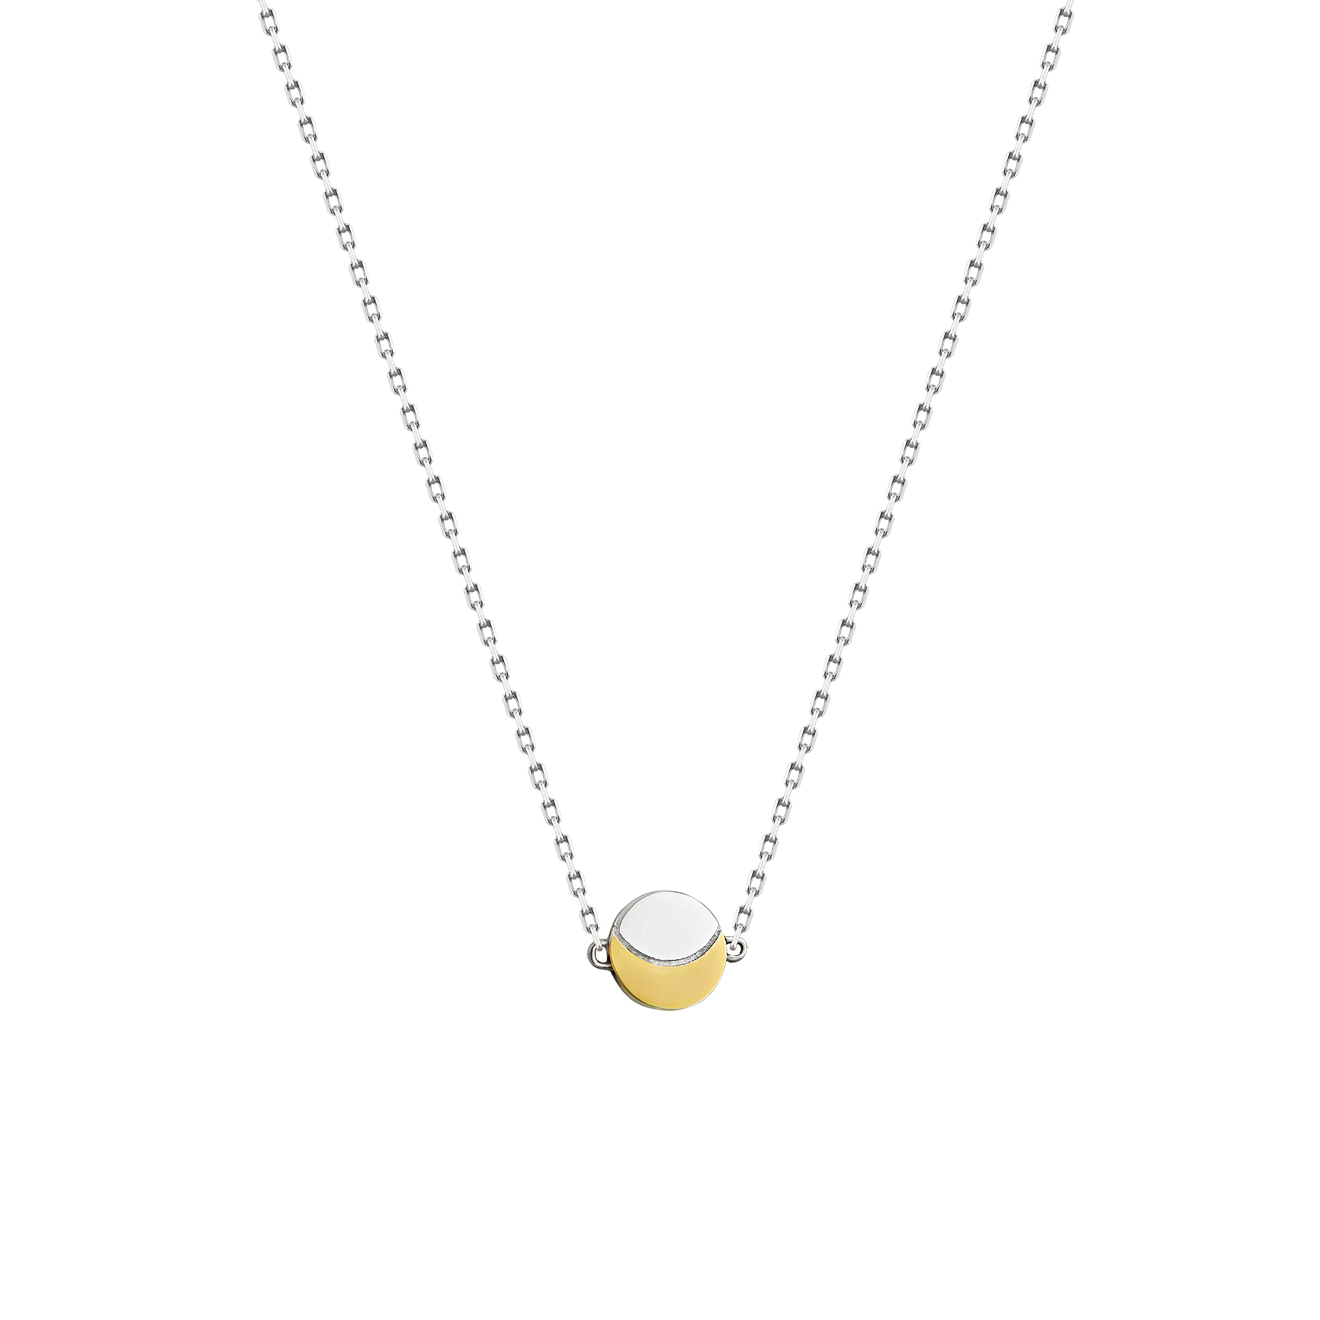 LUSIN Jewelry Колье Old Moon Necklace на тонкой цепочке из серебра a simple multilayer chain necklace women necklace aesthetic girl jewelry moon trendy crystal long choker collares